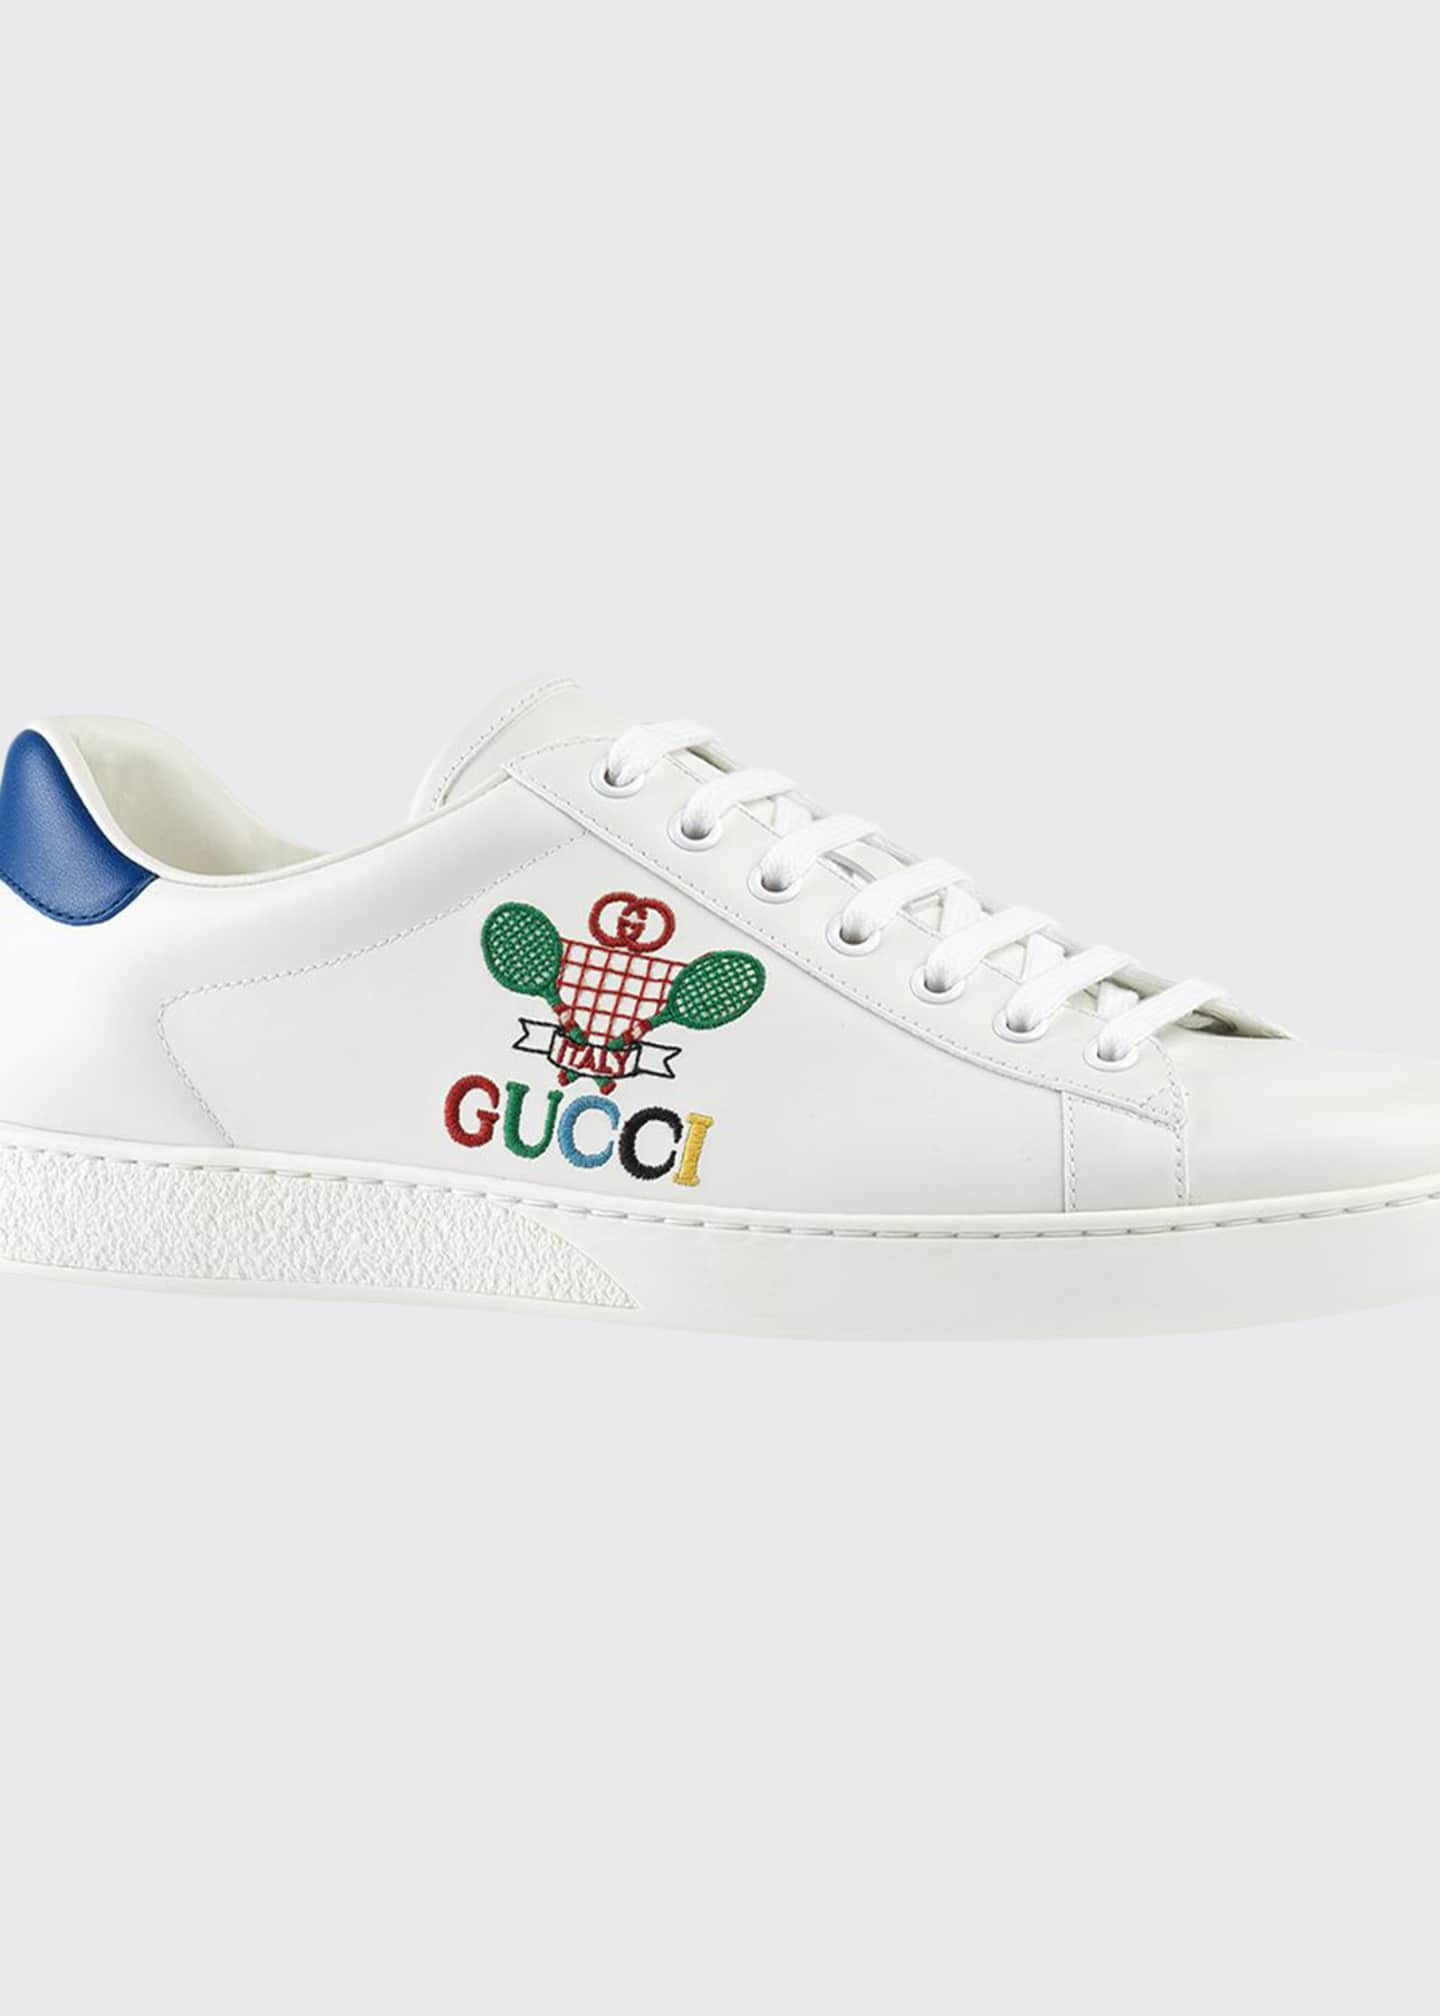 Gucci Shoes for Women at Bergdorf Goodman